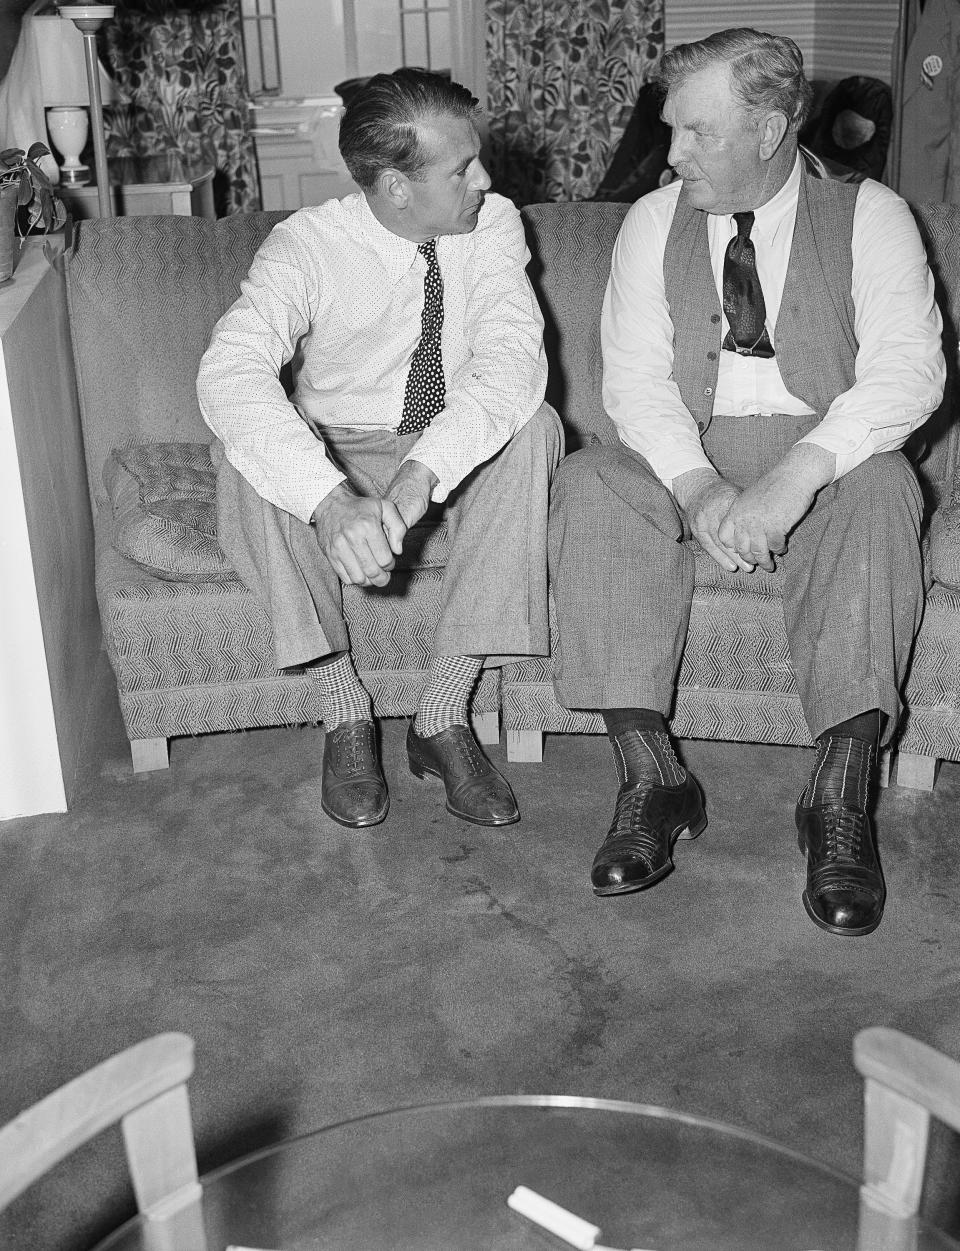 FILE—In this file photo from July 1, 1941, actor Gary Cooper, left, who played the title role in the movie "Sergeant York," talks with Sgt. Alvin York, on whose life the movie was based, at a New York hotel. The claim in Pennsylvania state Sen. Doug Mastriano's 2014 book about York, that a 1918 U.S. Army Signal Corps photo was mislabeled and actually shows York with three German officers he captured, has been disputed by rival researchers. (AP Photo, File)